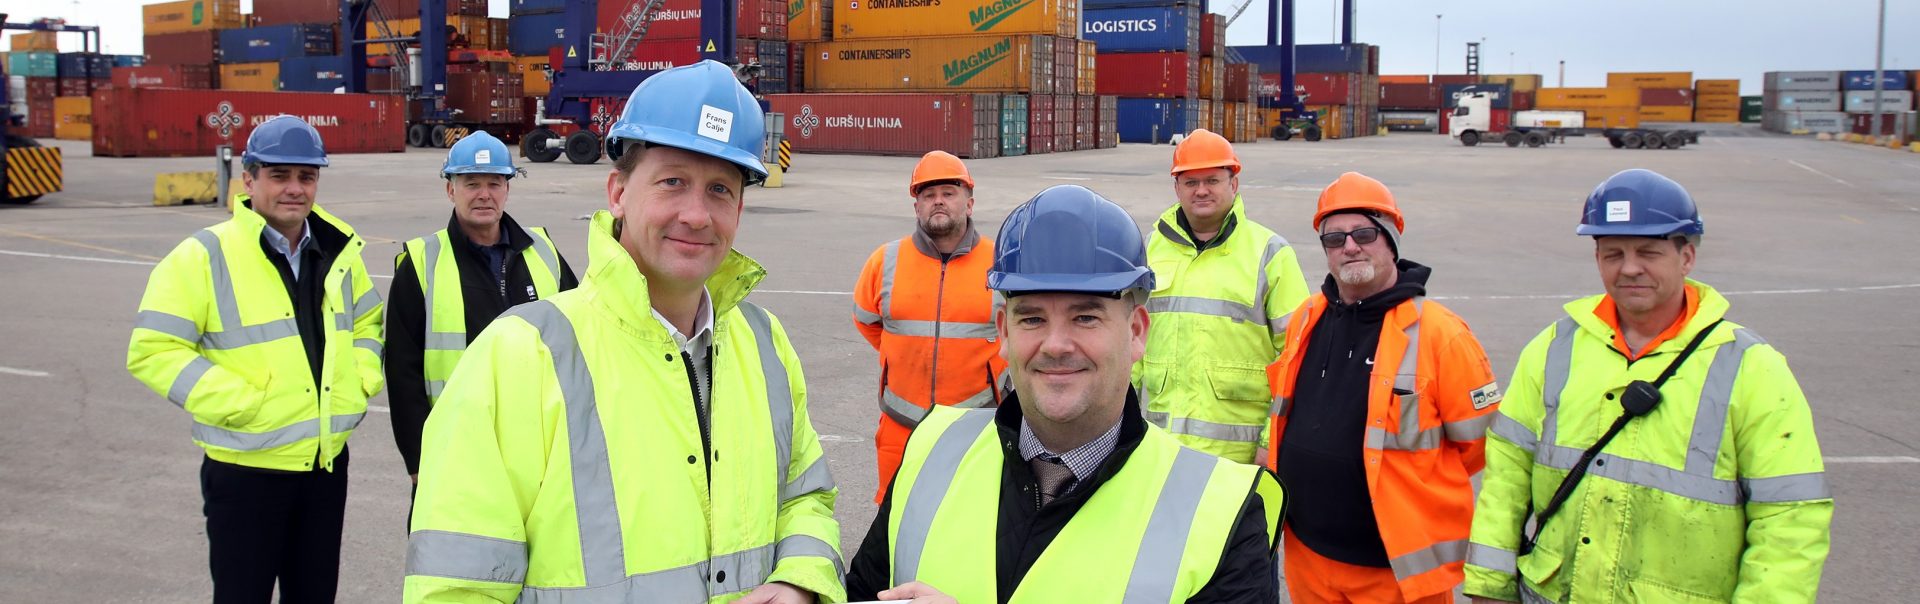 Containerships recognises PD Ports’ Teesport as top terminal